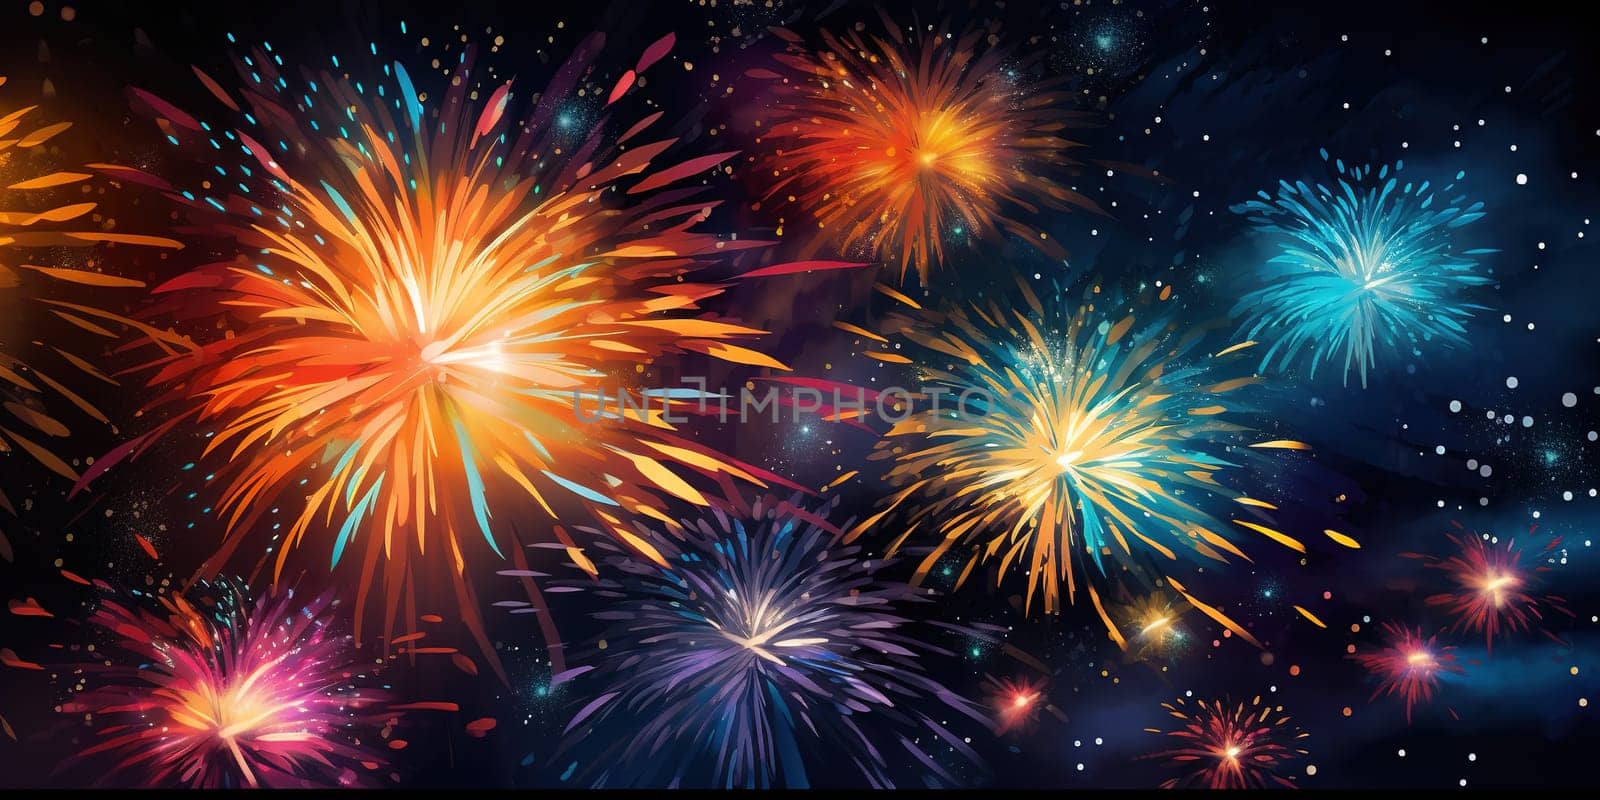 Fire work explosion at night sky, device containing gunpowder and other combustible chemicals that causes a spectacular explosion when ignited, used typically for display or in celebrations